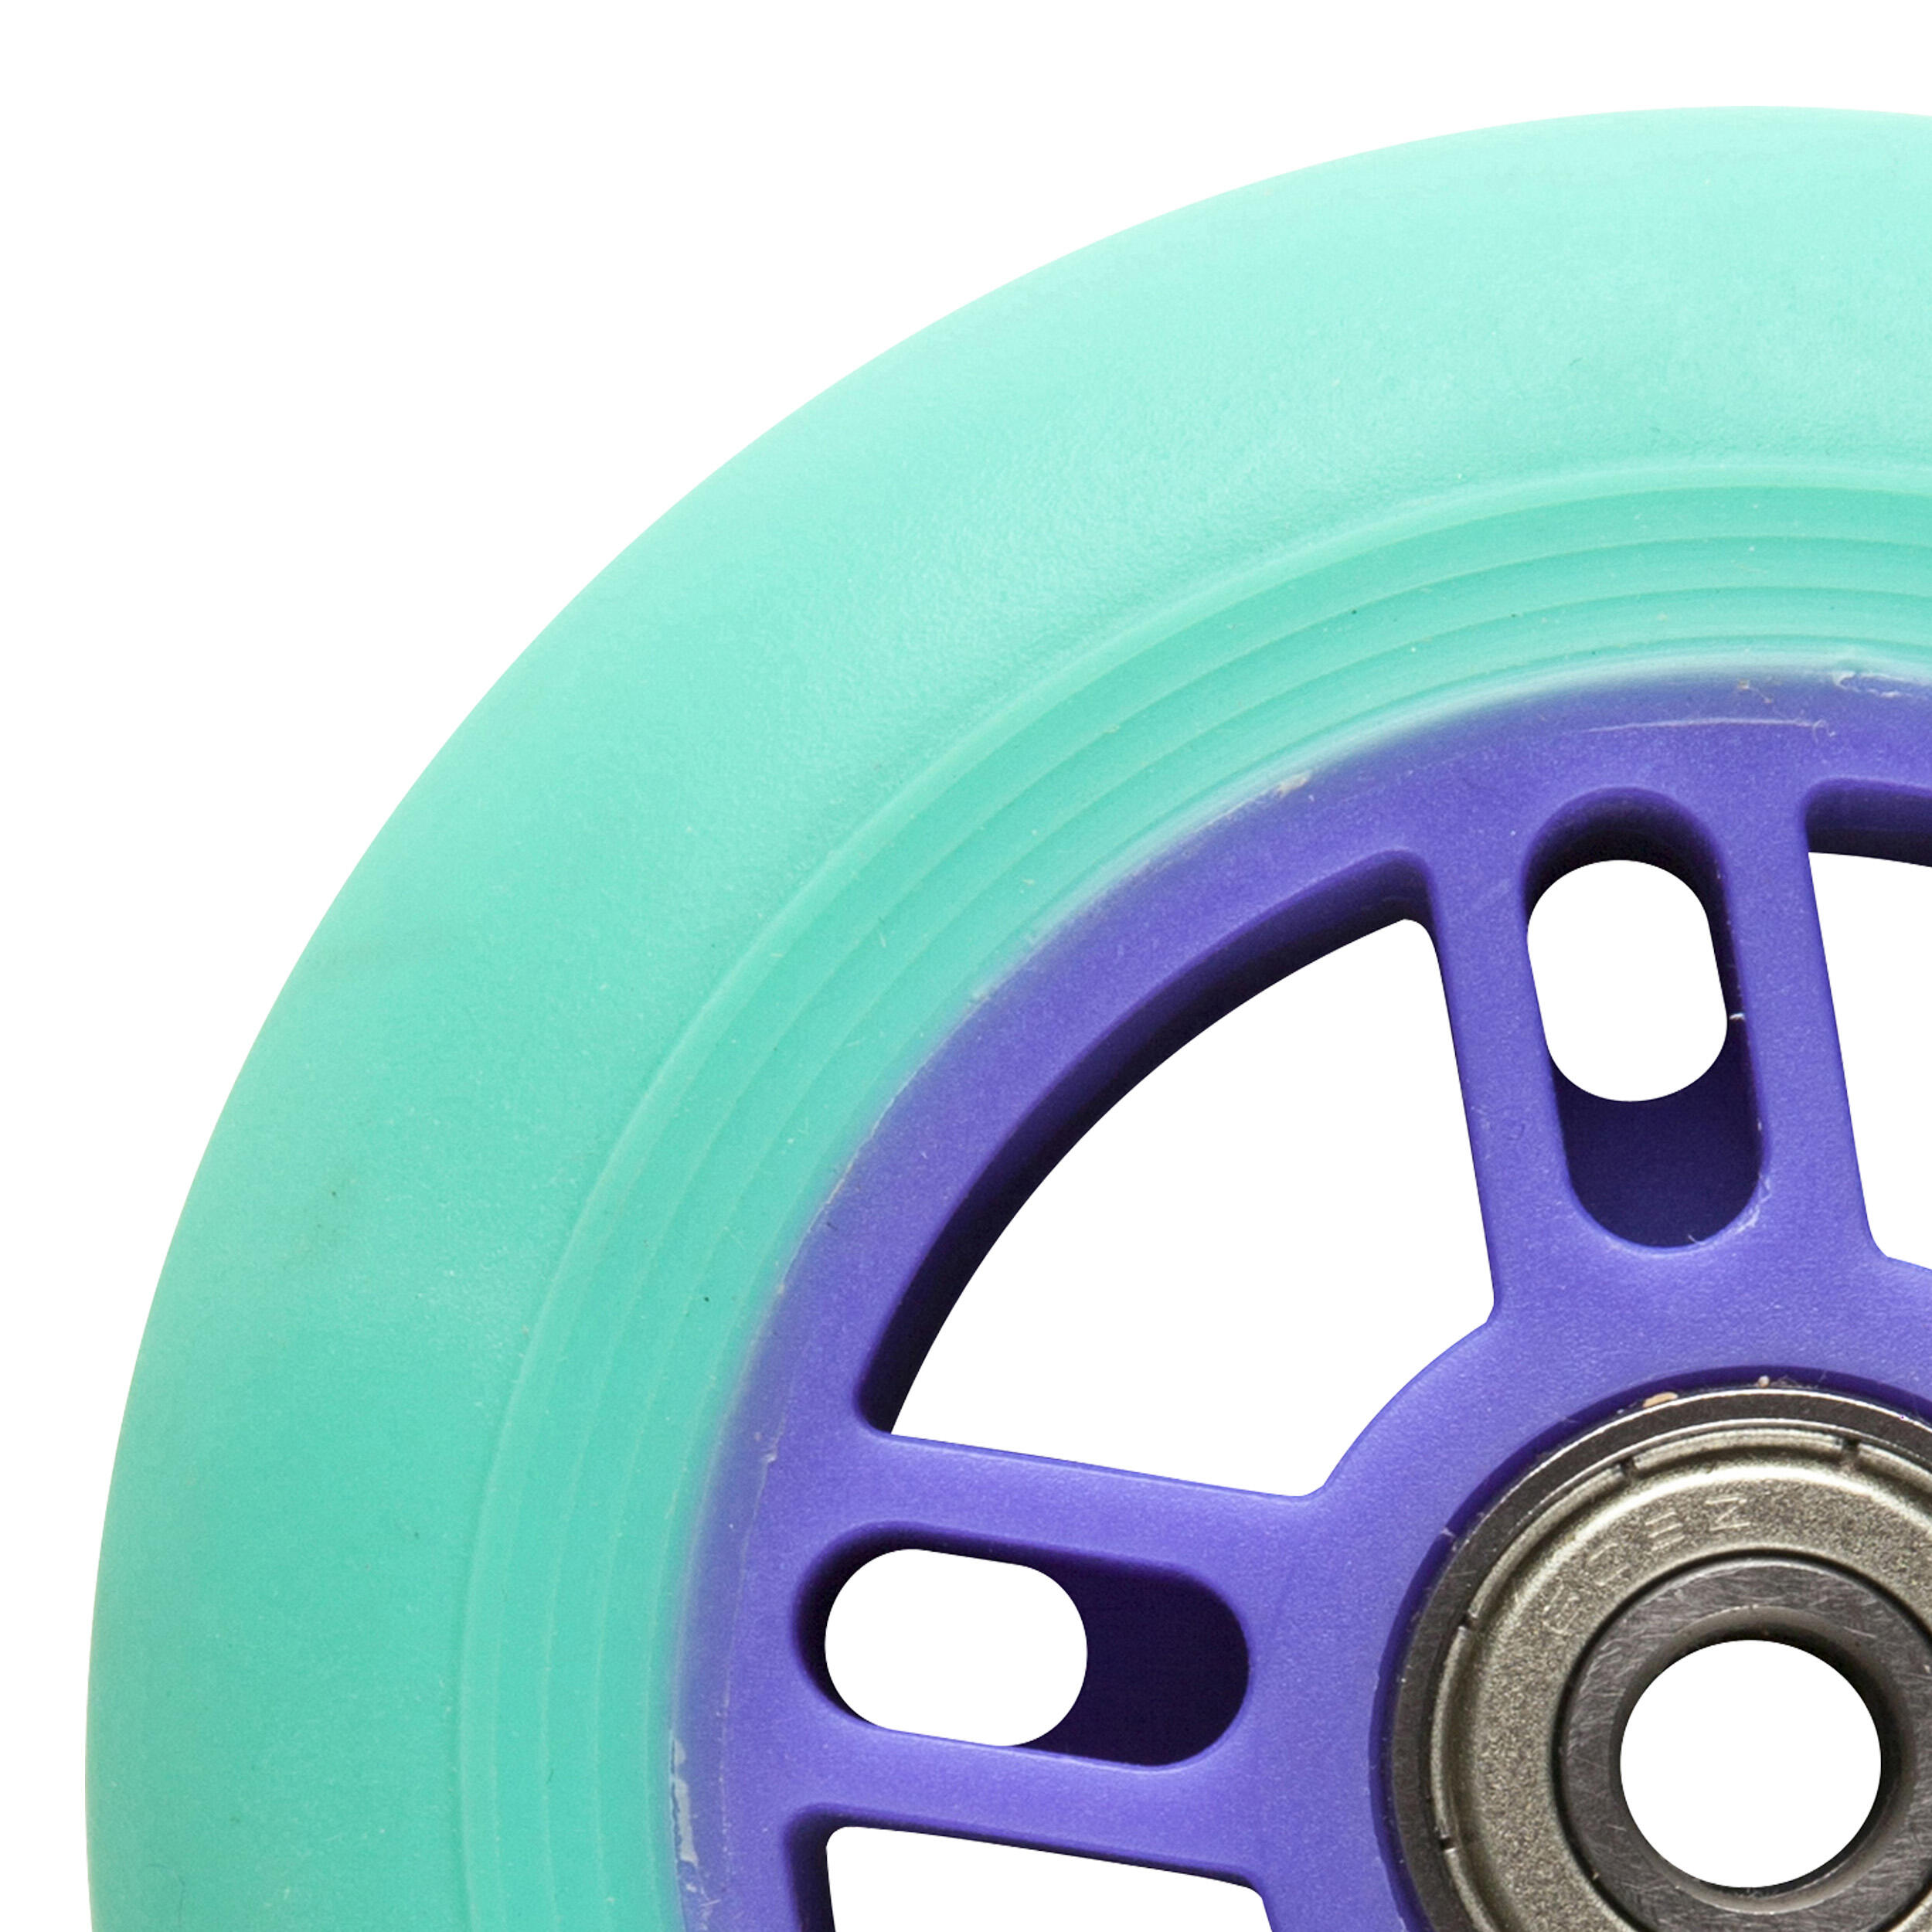 1 x 100 mm Scooter Wheel with Bearings - Green 2/5